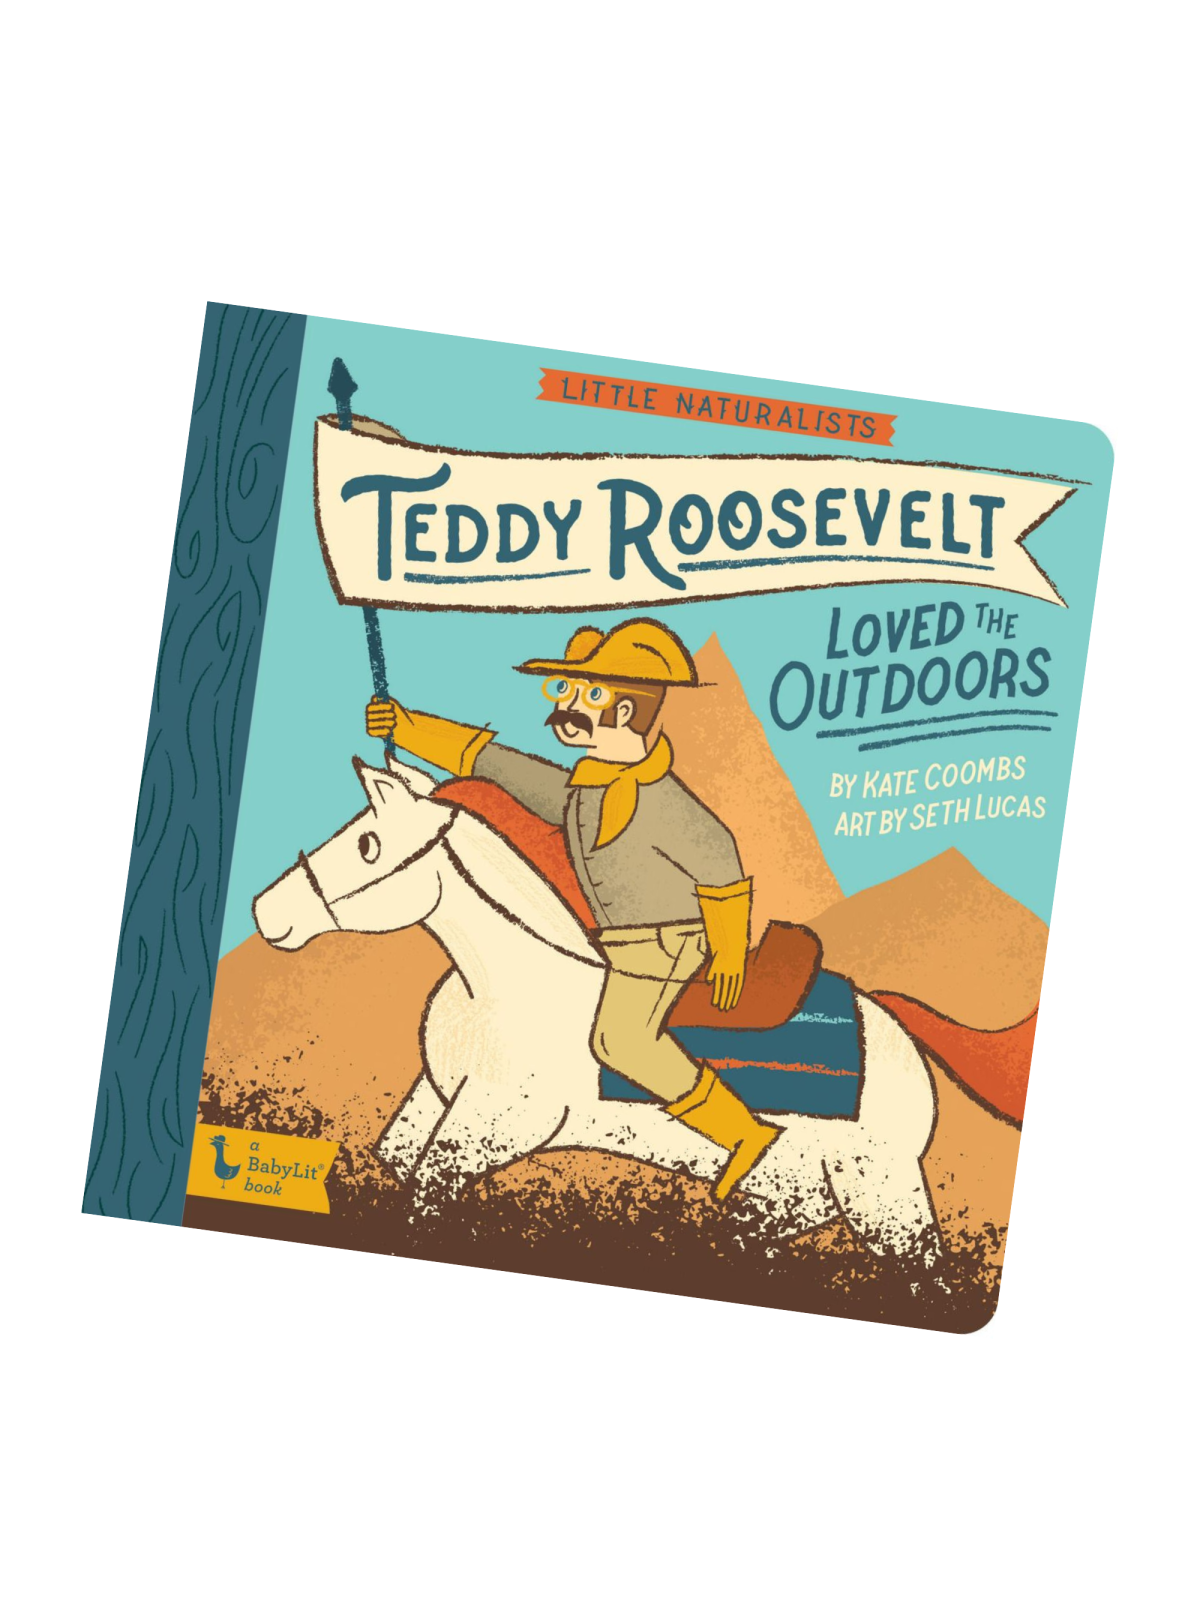 Little Naturalists Teddy Roosevelt, Loved The Outdoors Board Book